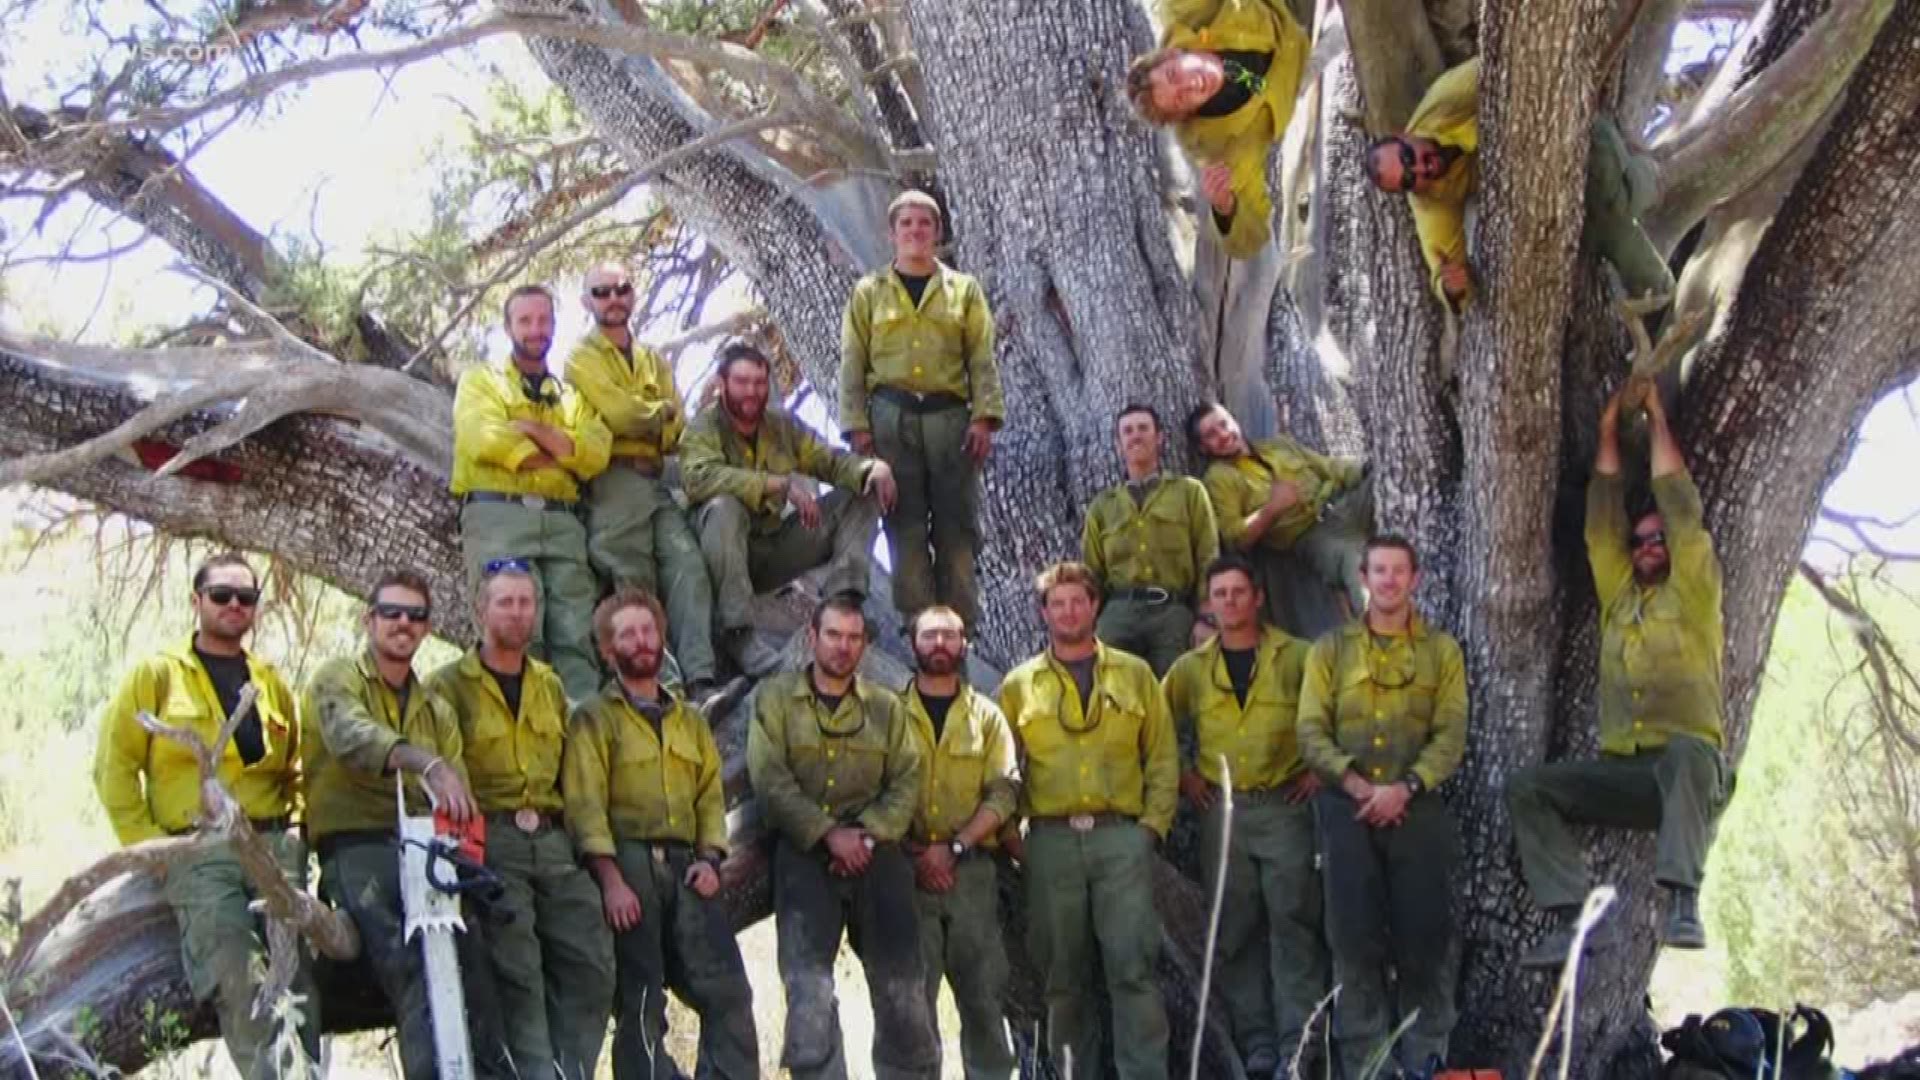 Six years ago the small town of Yarnell, AZ was under evacuation and a 20 man crew, the Granite Mountain Hotshots, were on the frontlines of the fire. We remember the 19 lost on the six-year anniversary of the loss.